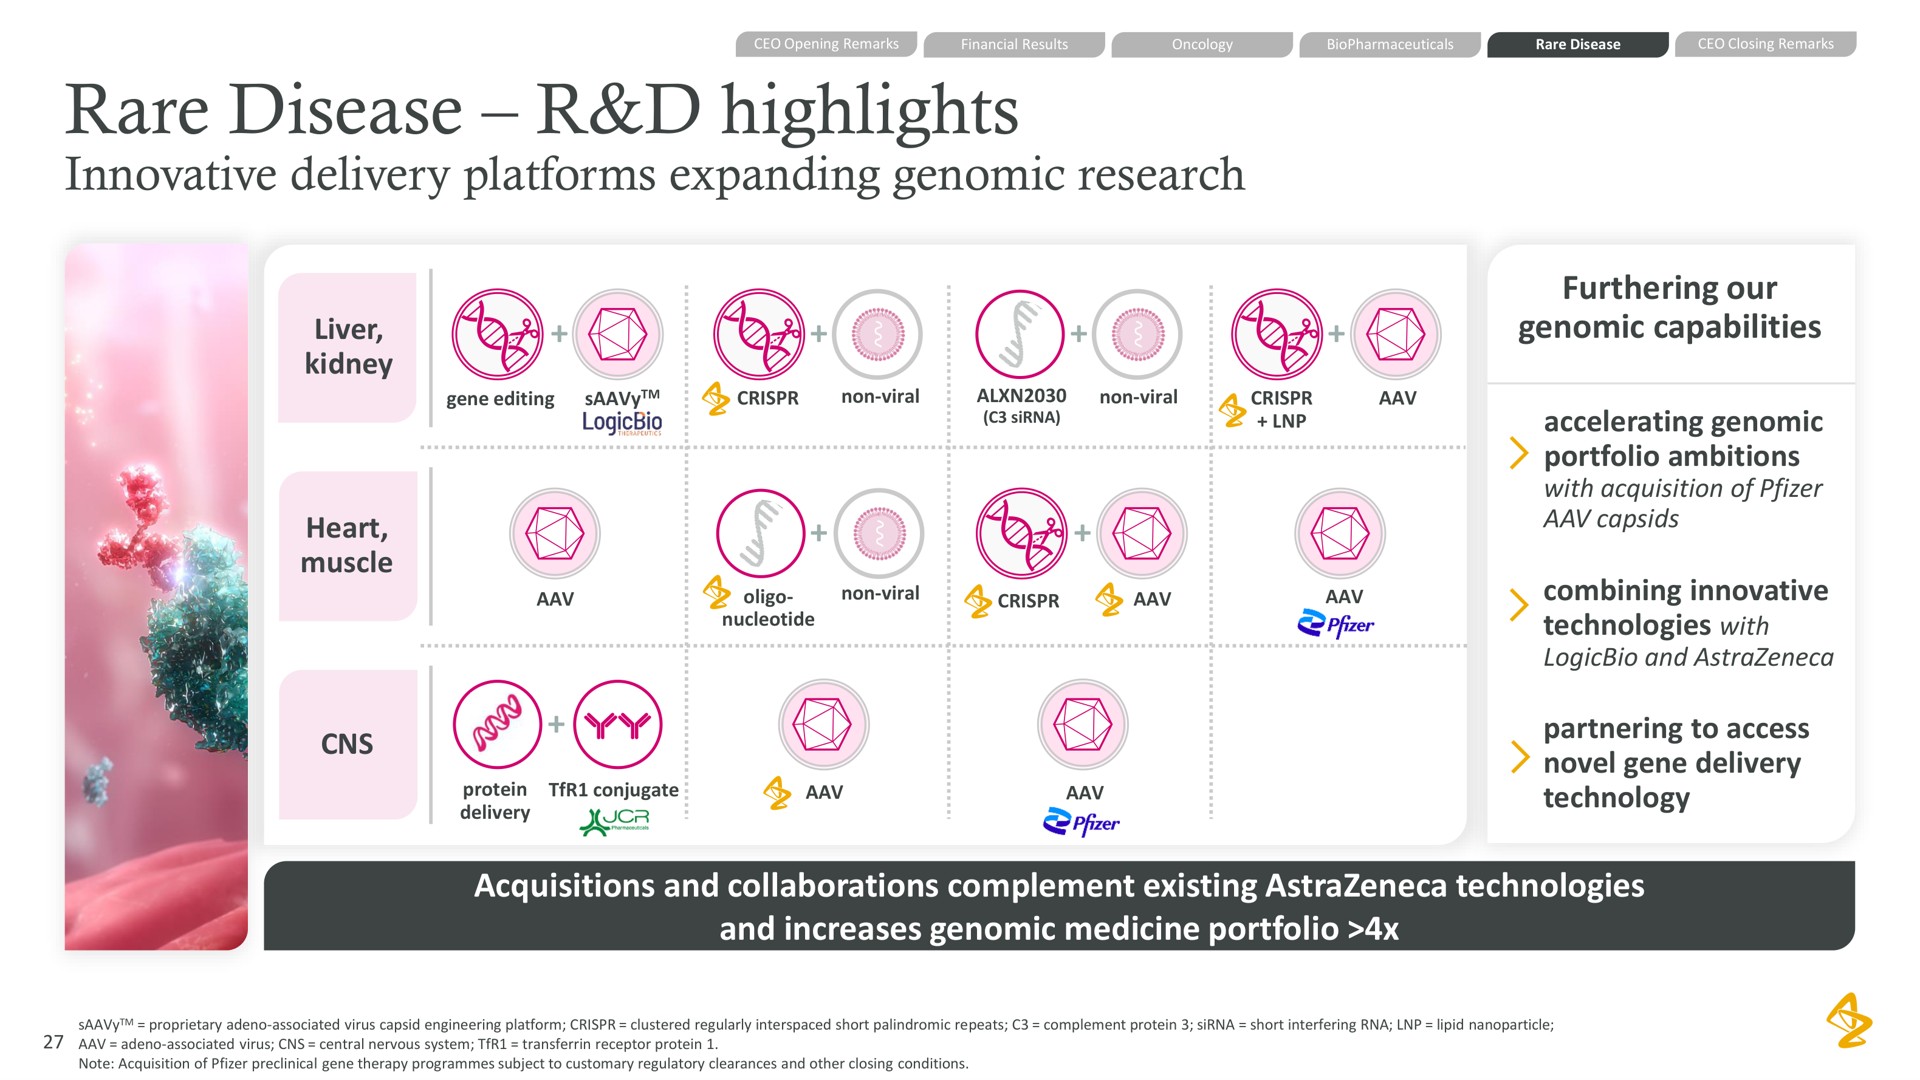 rare disease highlights innovative delivery platforms expanding genomic research furthering our genomic capabilities acquisitions and collaborations complement existing technologies and increases genomic medicine portfolio | AstraZeneca